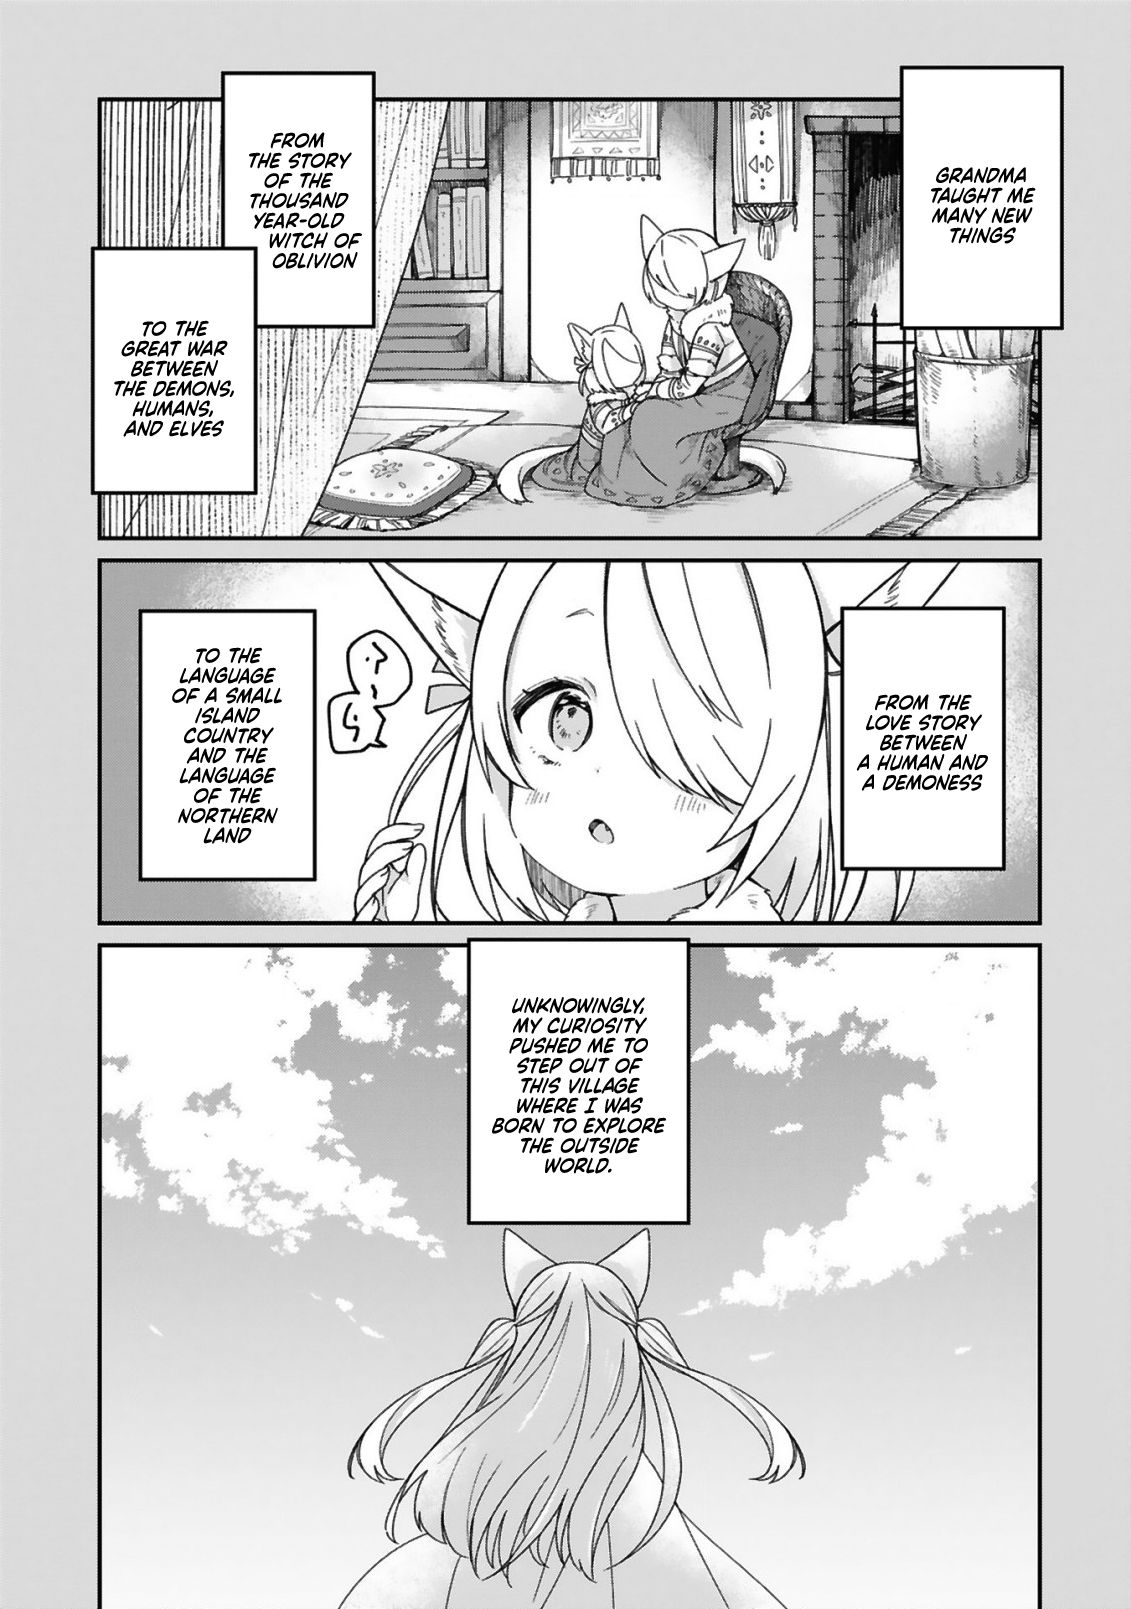 I Was Summoned By The Demon Lord, But I Can't Understand Her Language - chapter 17 - #1